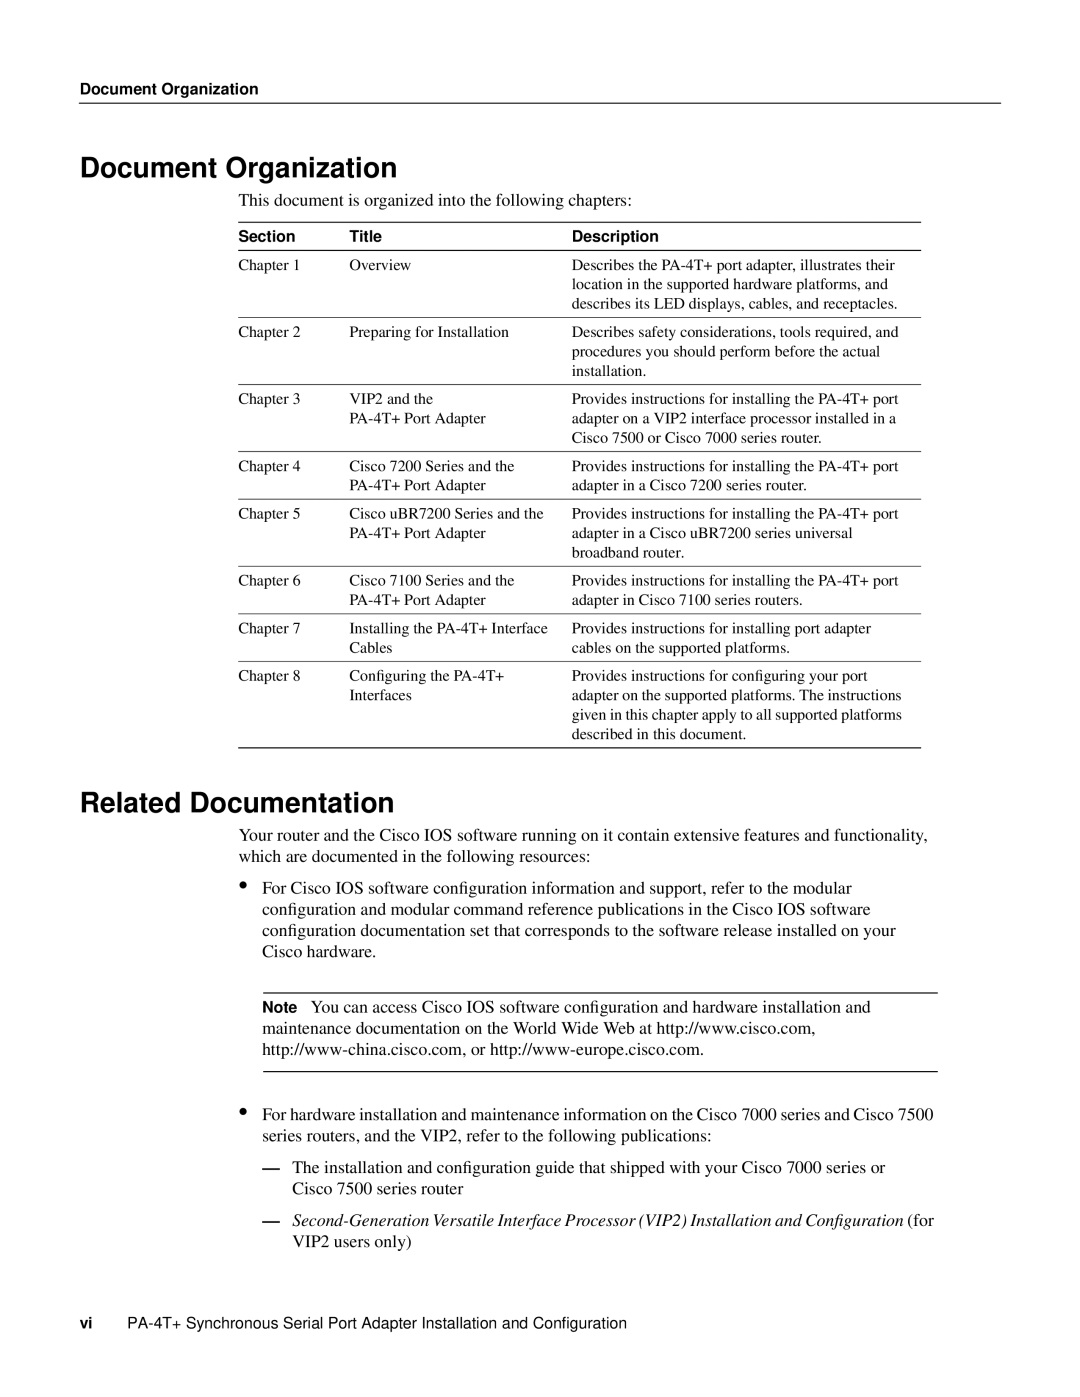 Cisco Systems PA-4T manual Document Organization, Related Documentation 